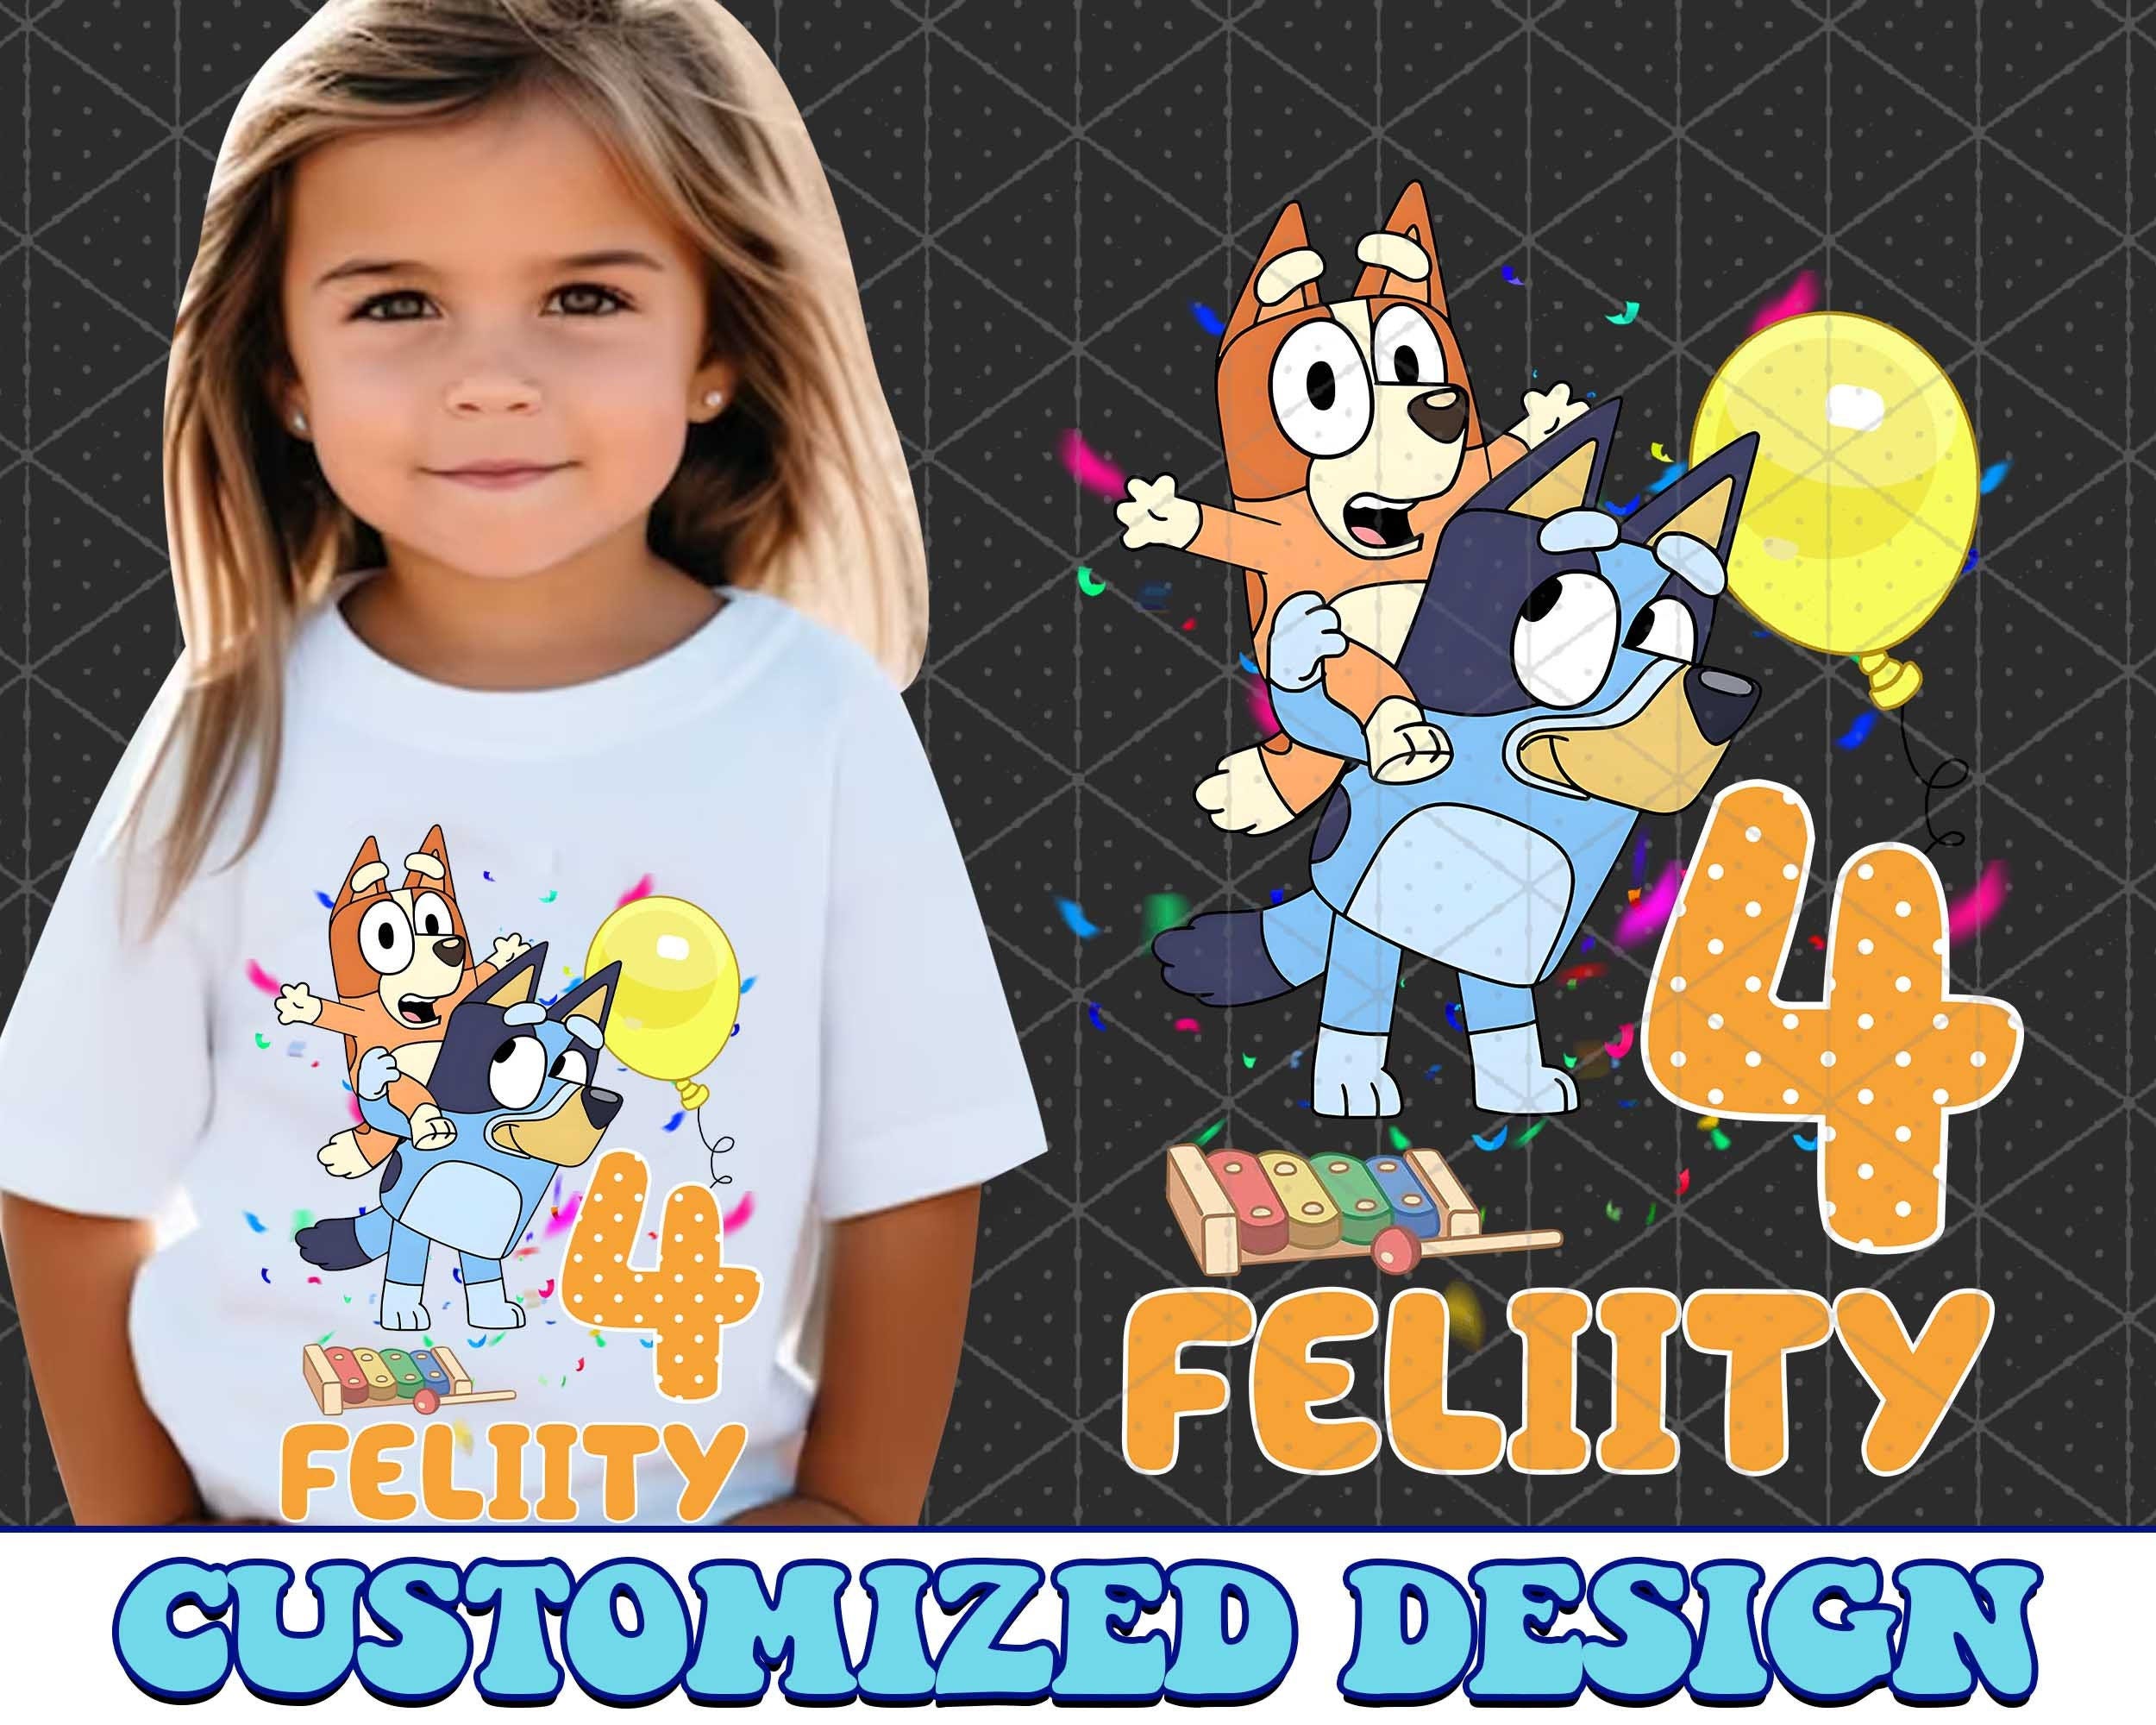 Customized Bluey Birthday PNG, Bluey Family PNG, Bluey The Eras Tour Png, Bluey Bingo Png, Bluey Mom Png, Bluey Dad Png, Bluey Friends